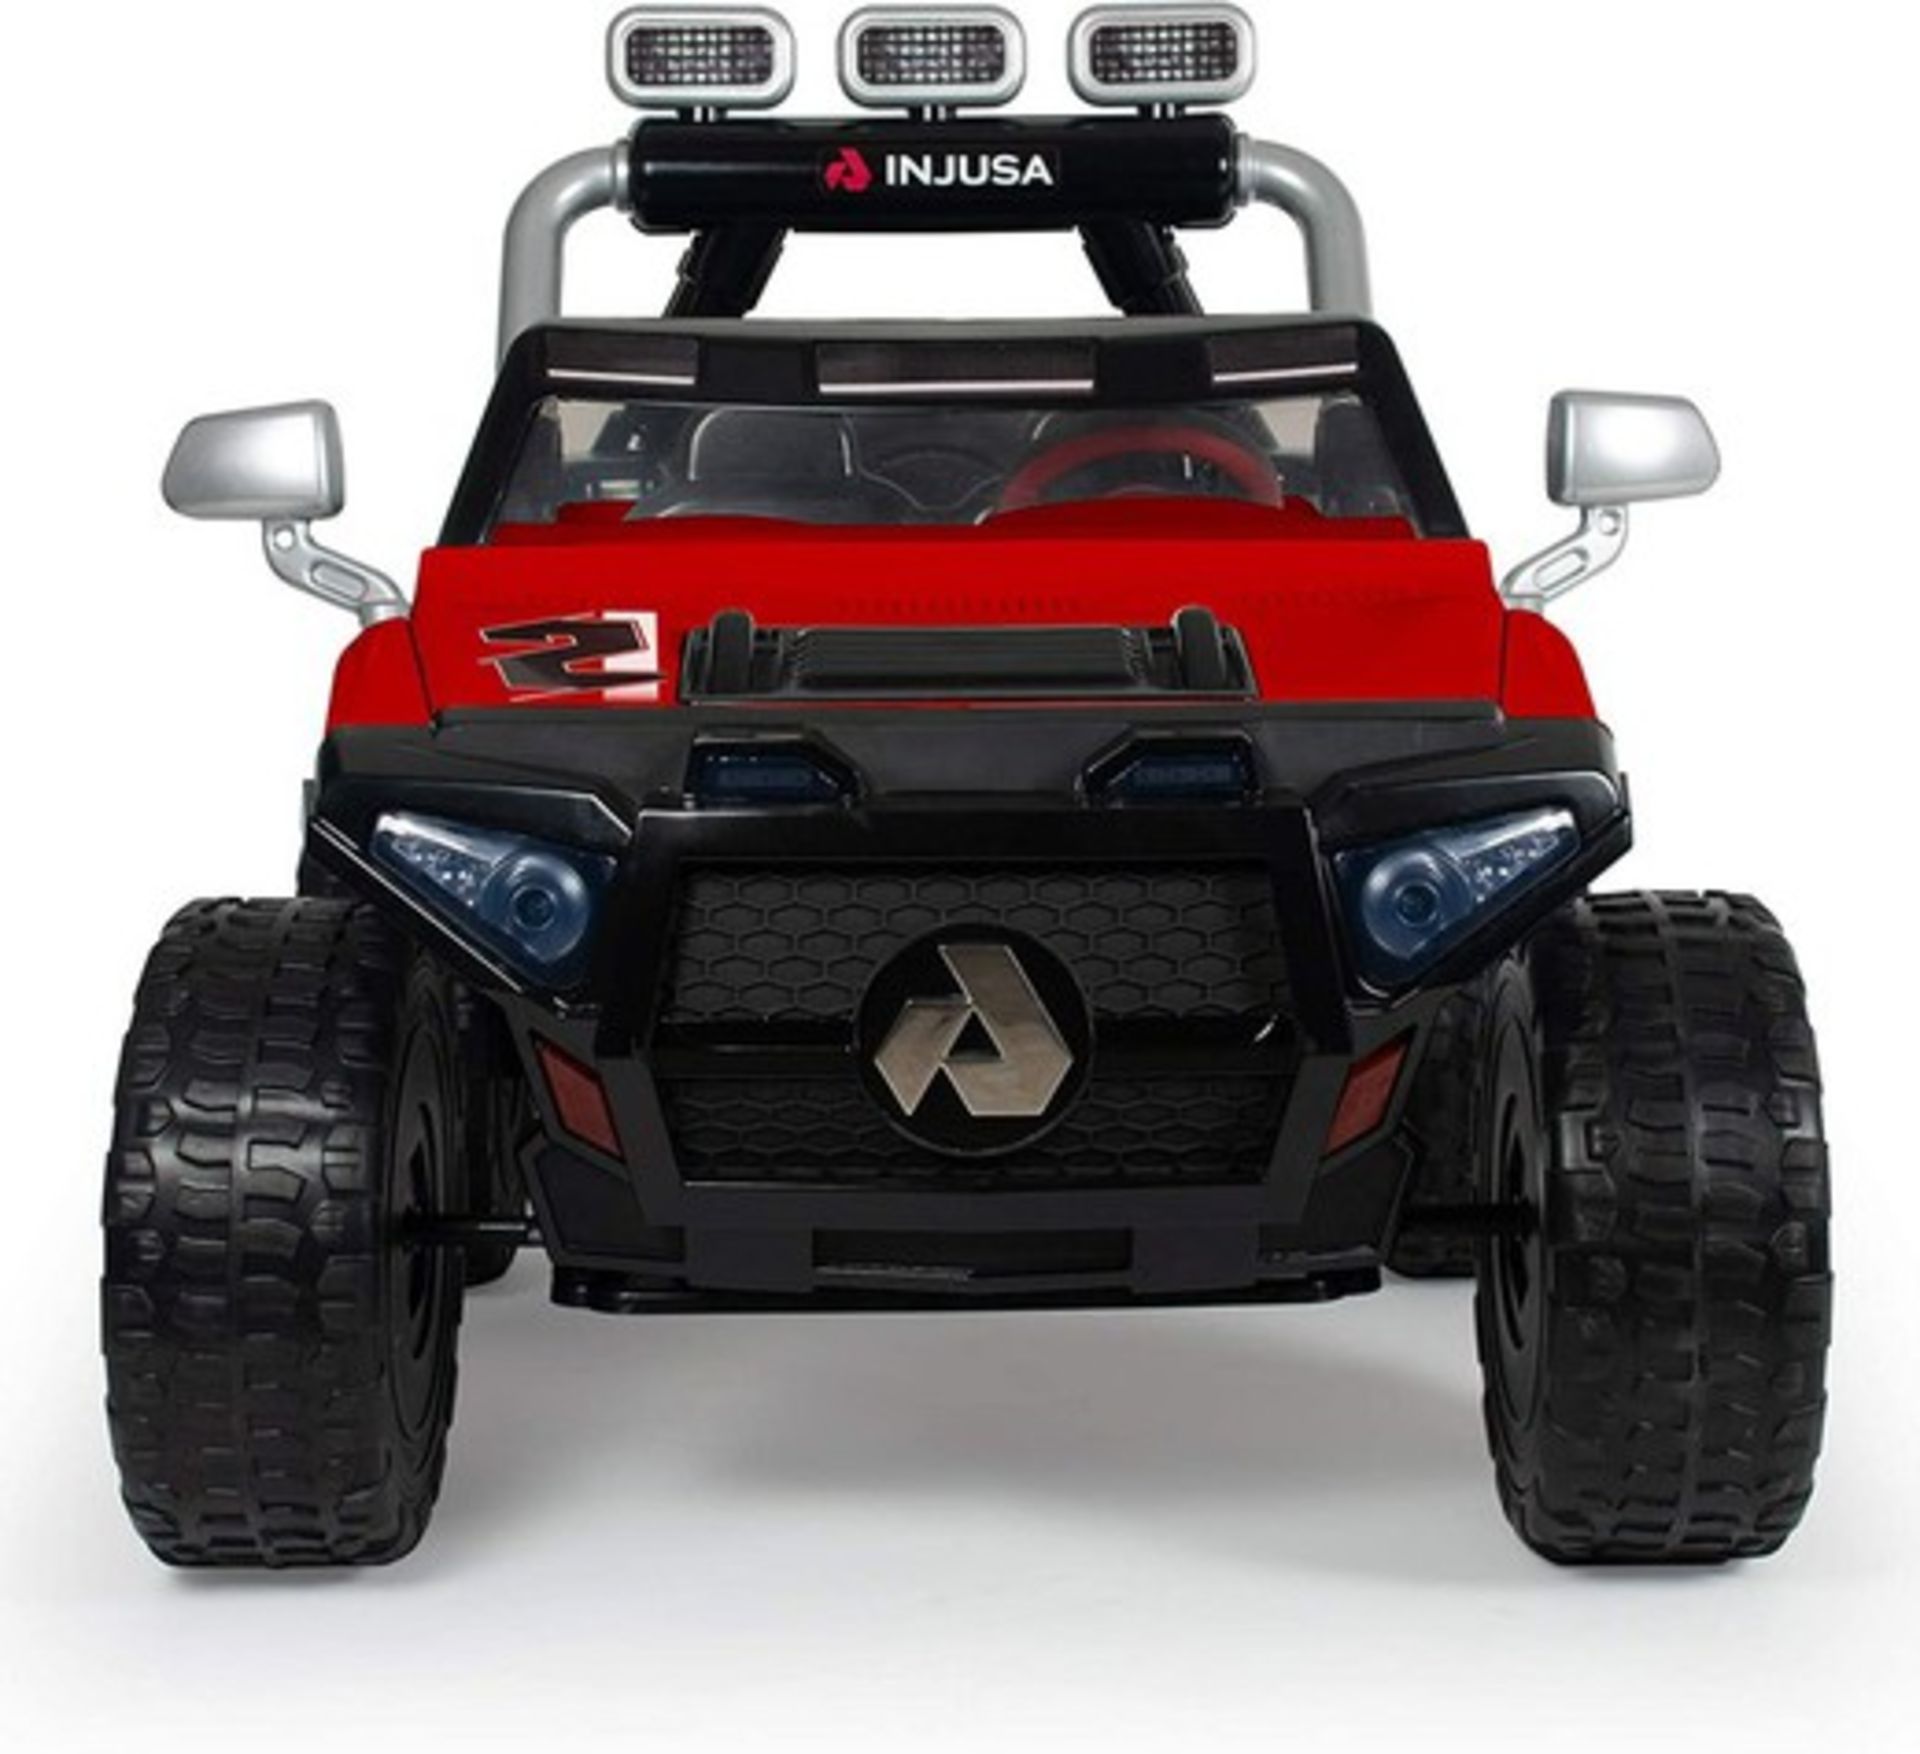 1 x Large Injusa Kids Electric Ride On 24V Monster Car Off-Road Style - 65324 - HTYS175 - CL987 - - Image 13 of 30